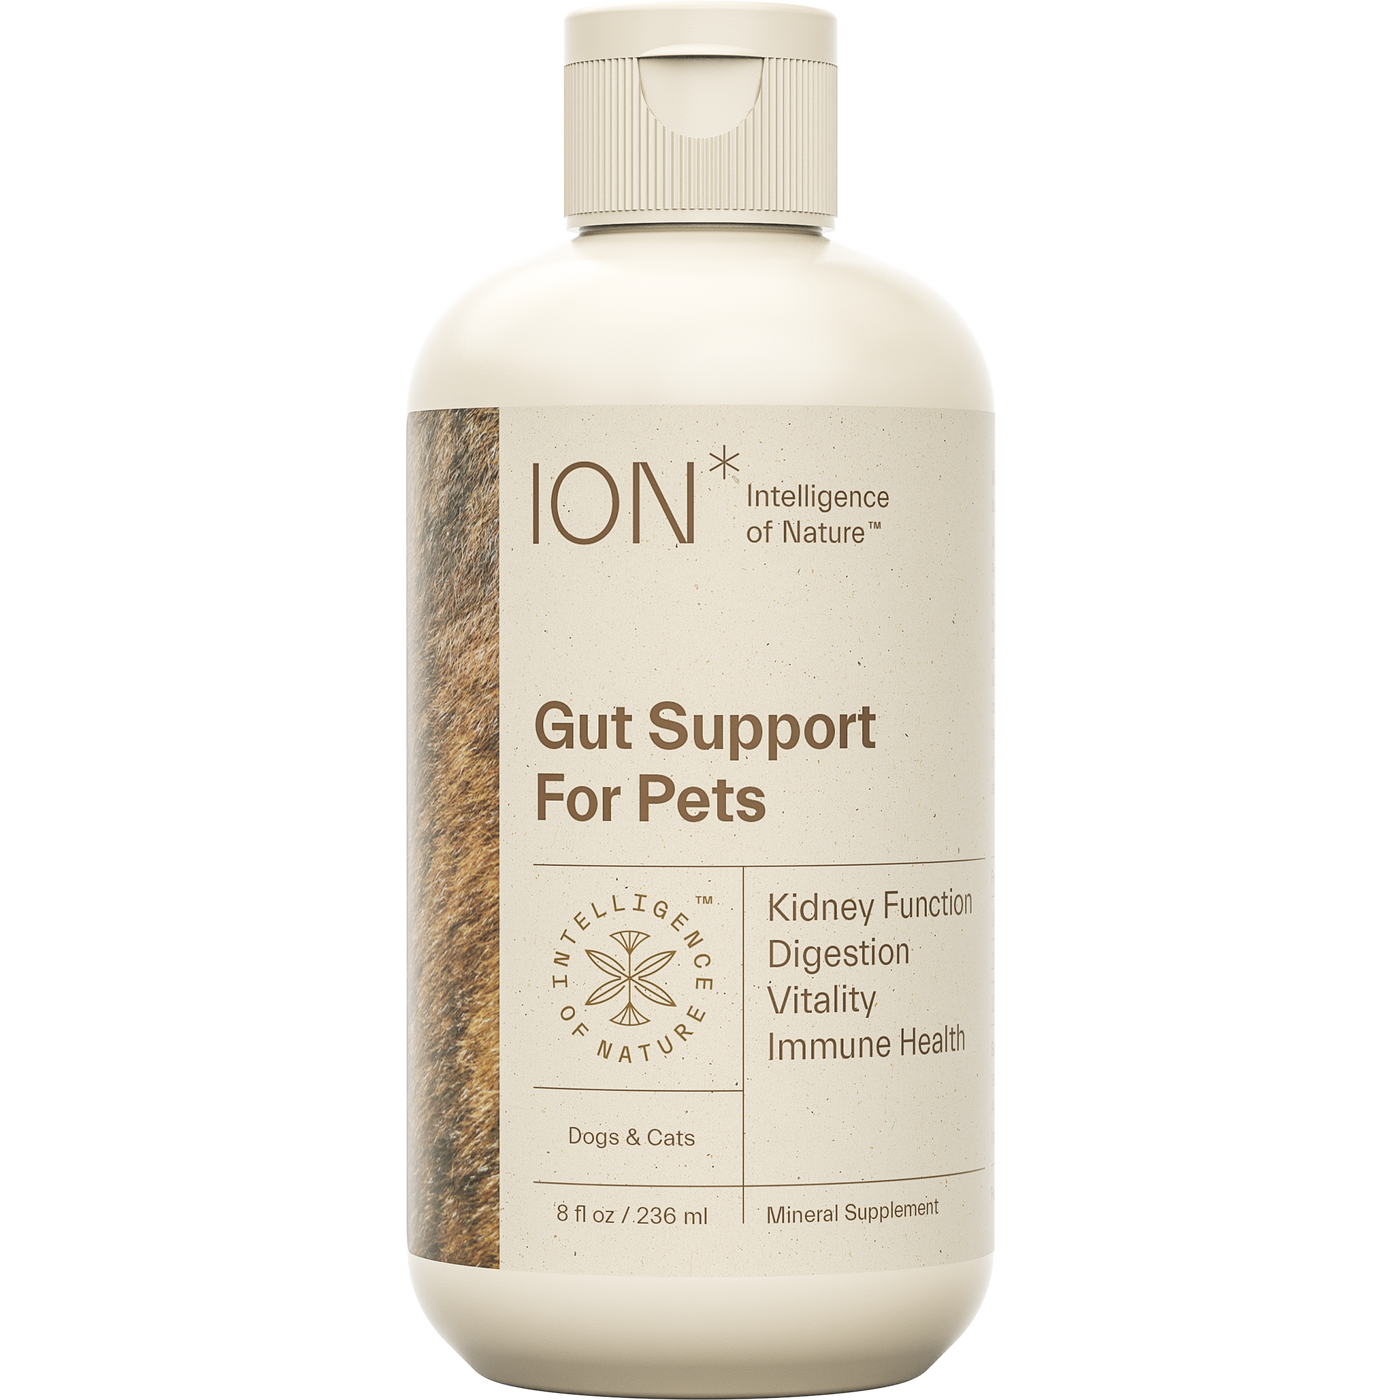 ION* Gut Support for Pets 8 fl oz Curated Wellness